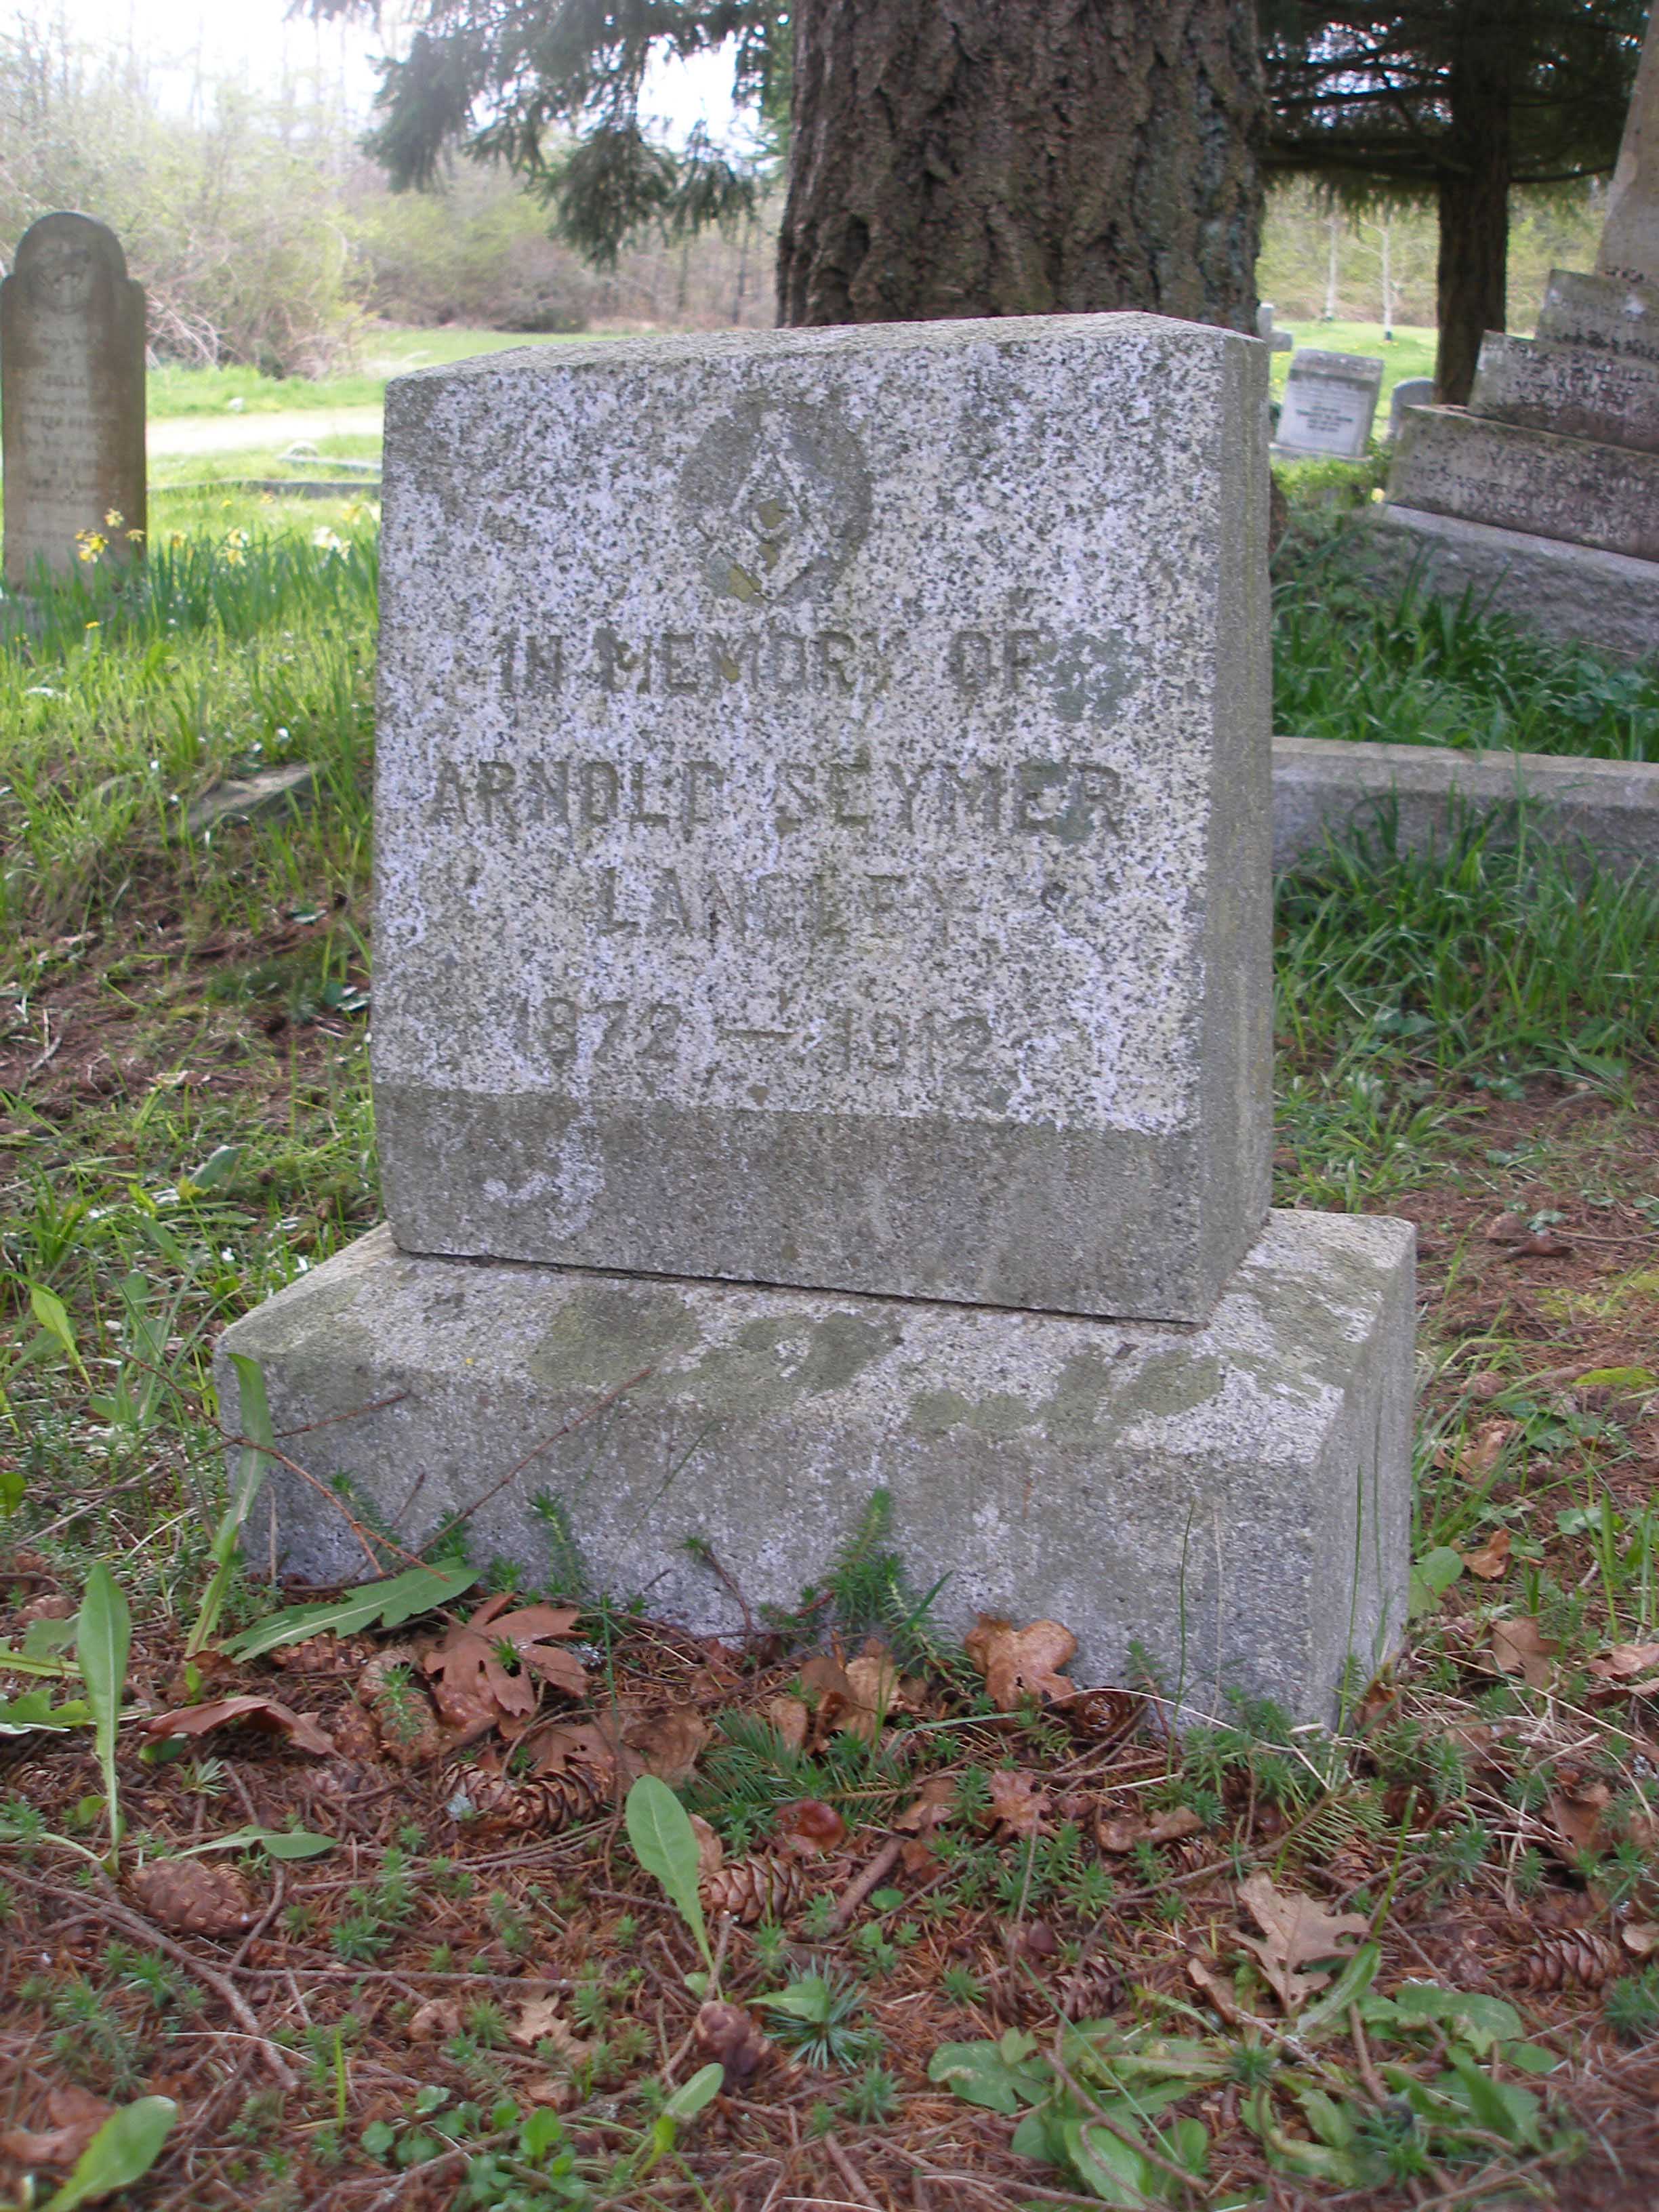 Arnold Langley grave